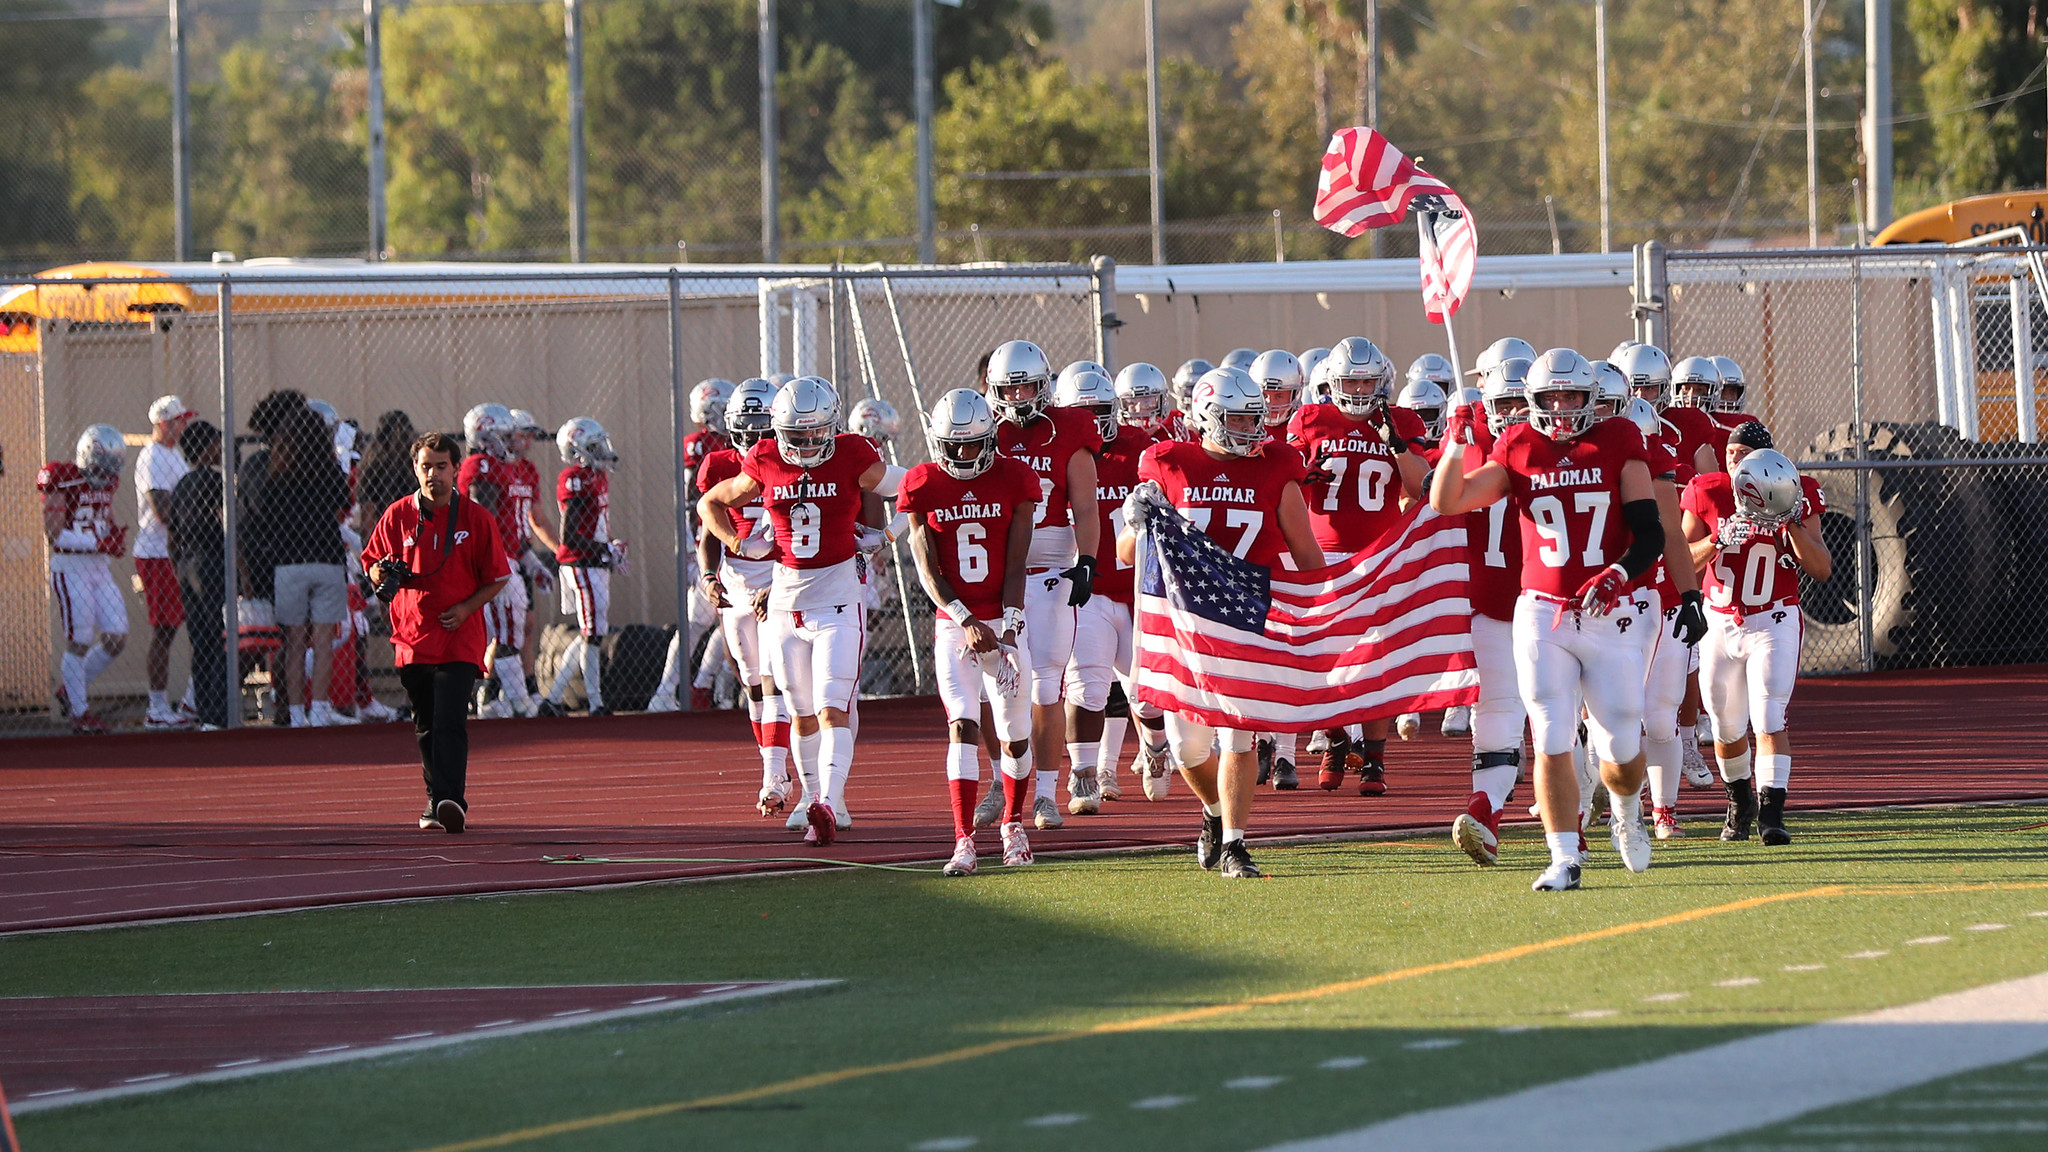 The Comet football team charges the field at a game honoring 9/11. (Photo courtesy of Hugh Cox)